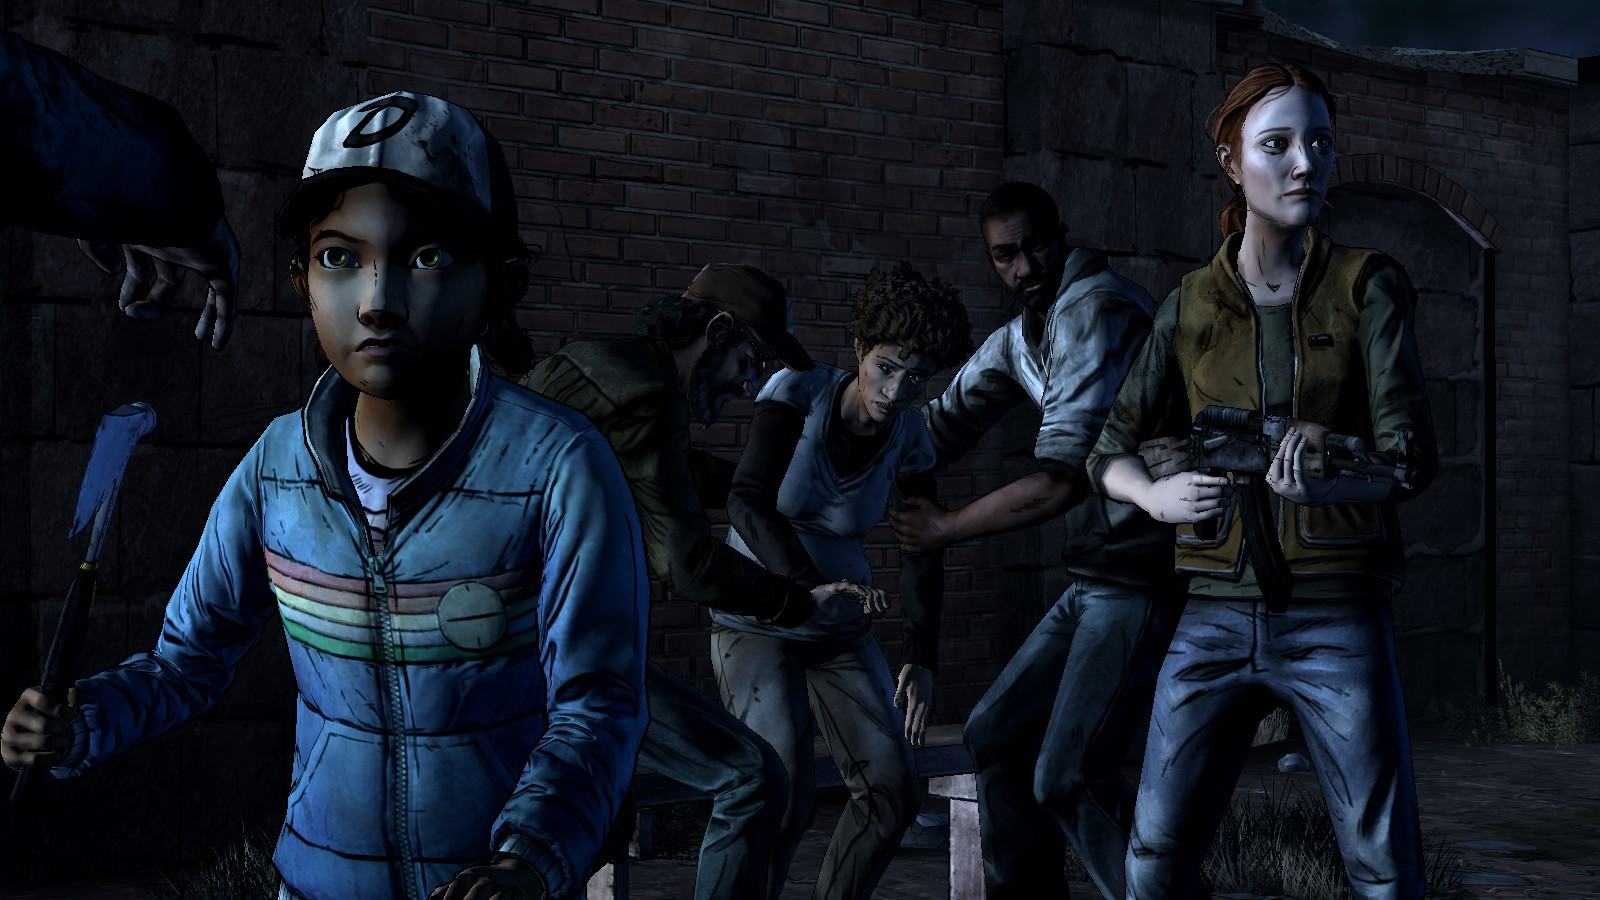 The walking dead game s2 e4 “amid the ruins” review